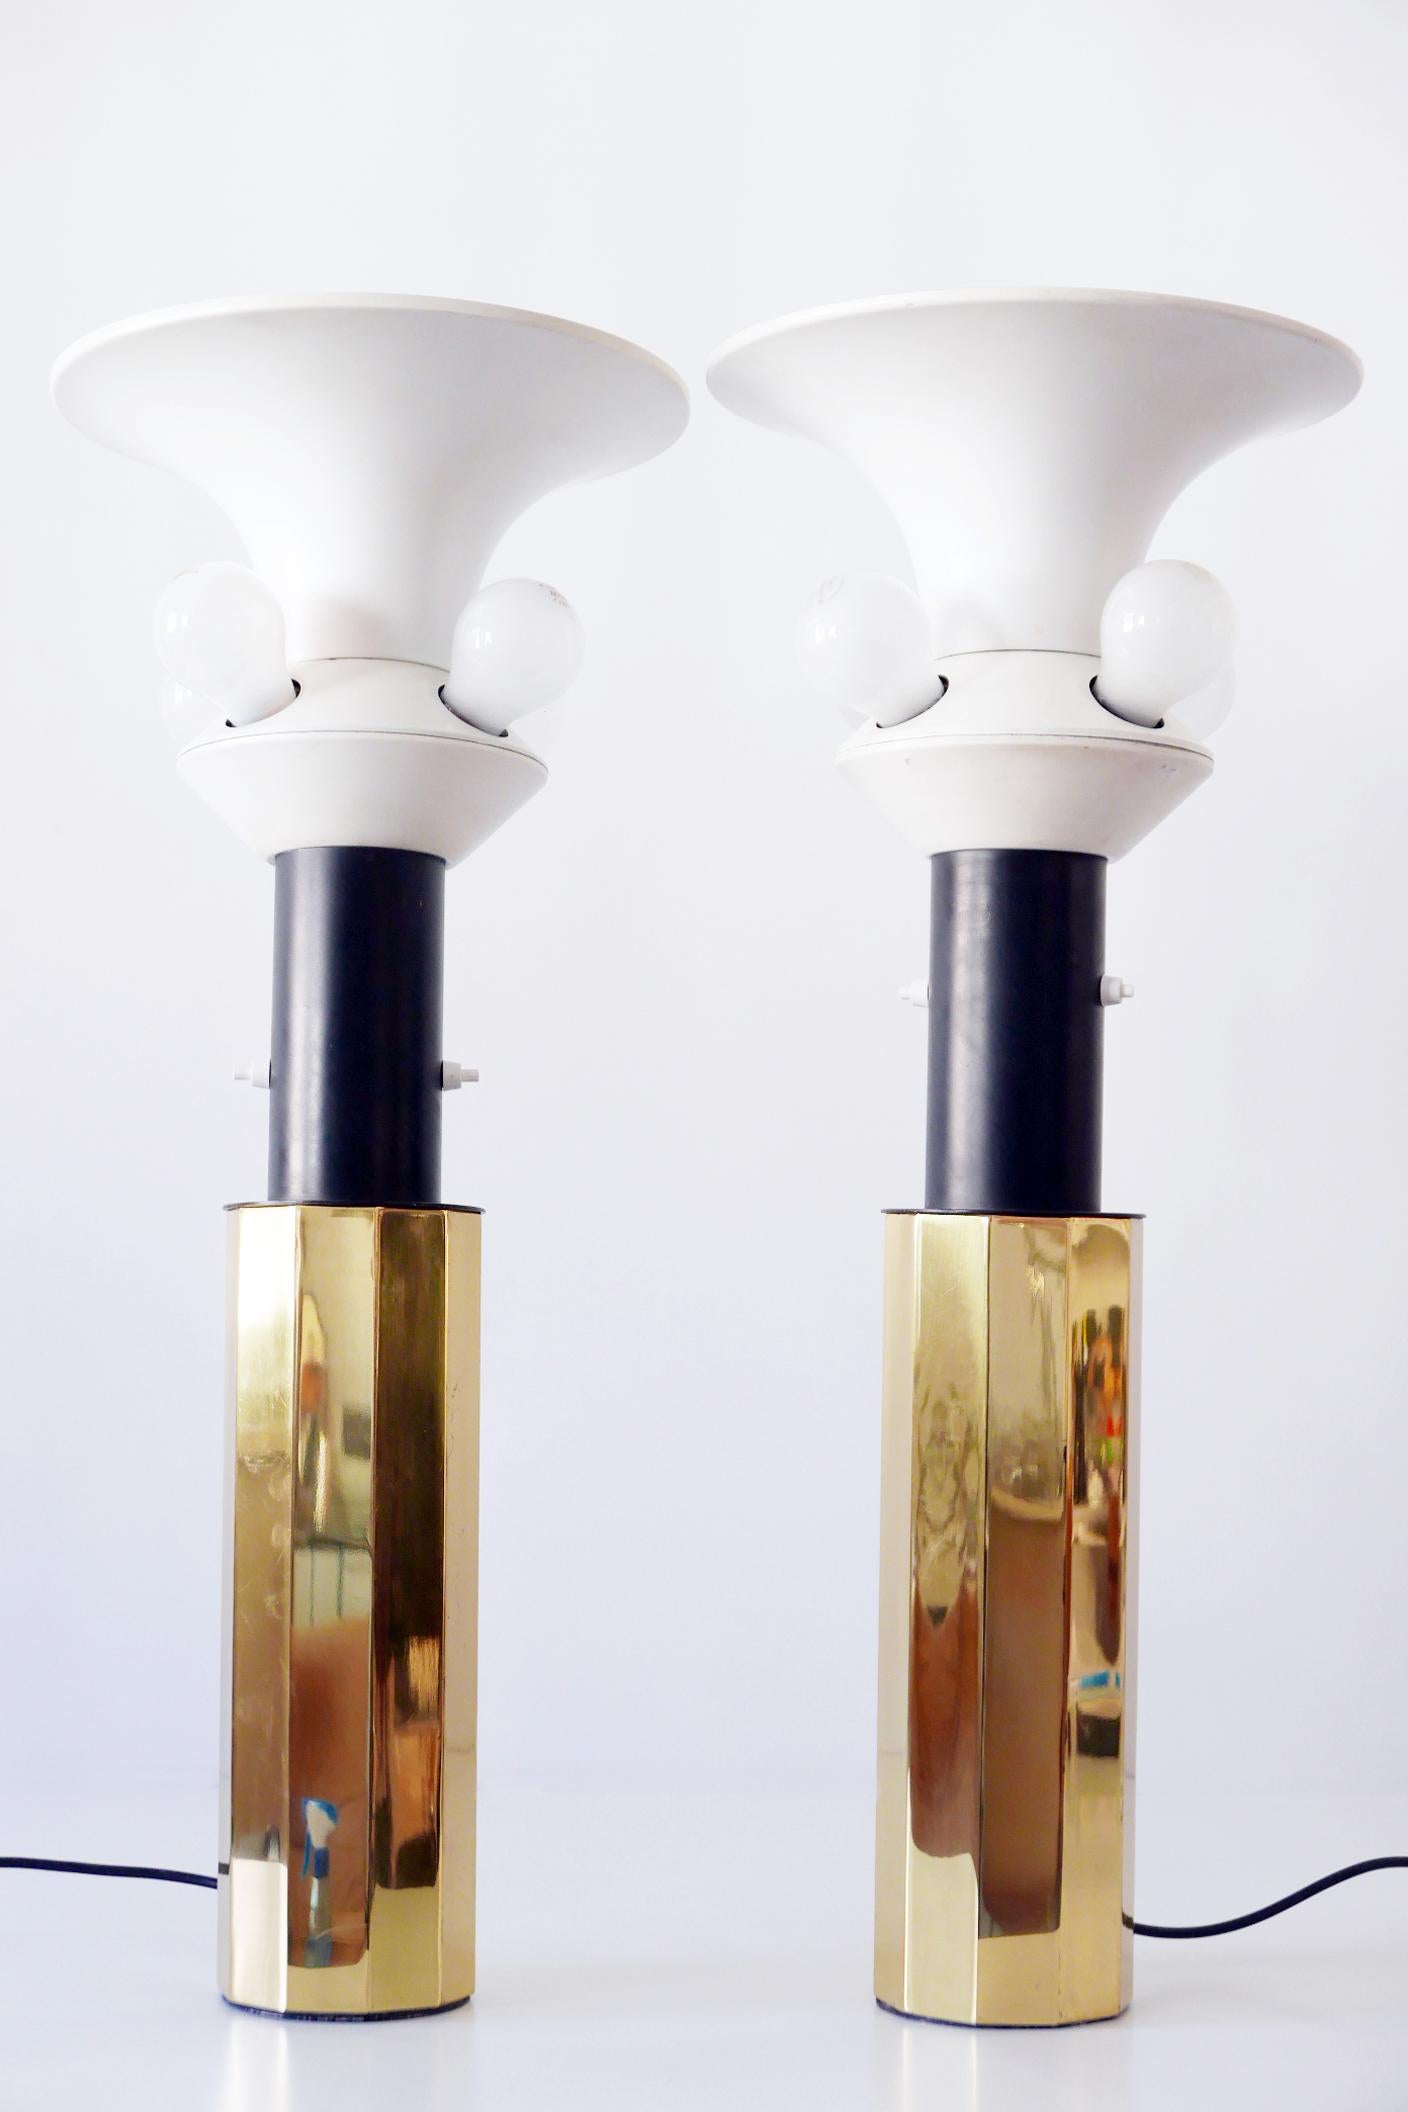 Set of Two Huge, 5-Flamed Midcentury Decagonal Brass Table Lamps, 1960s, Germany For Sale 2